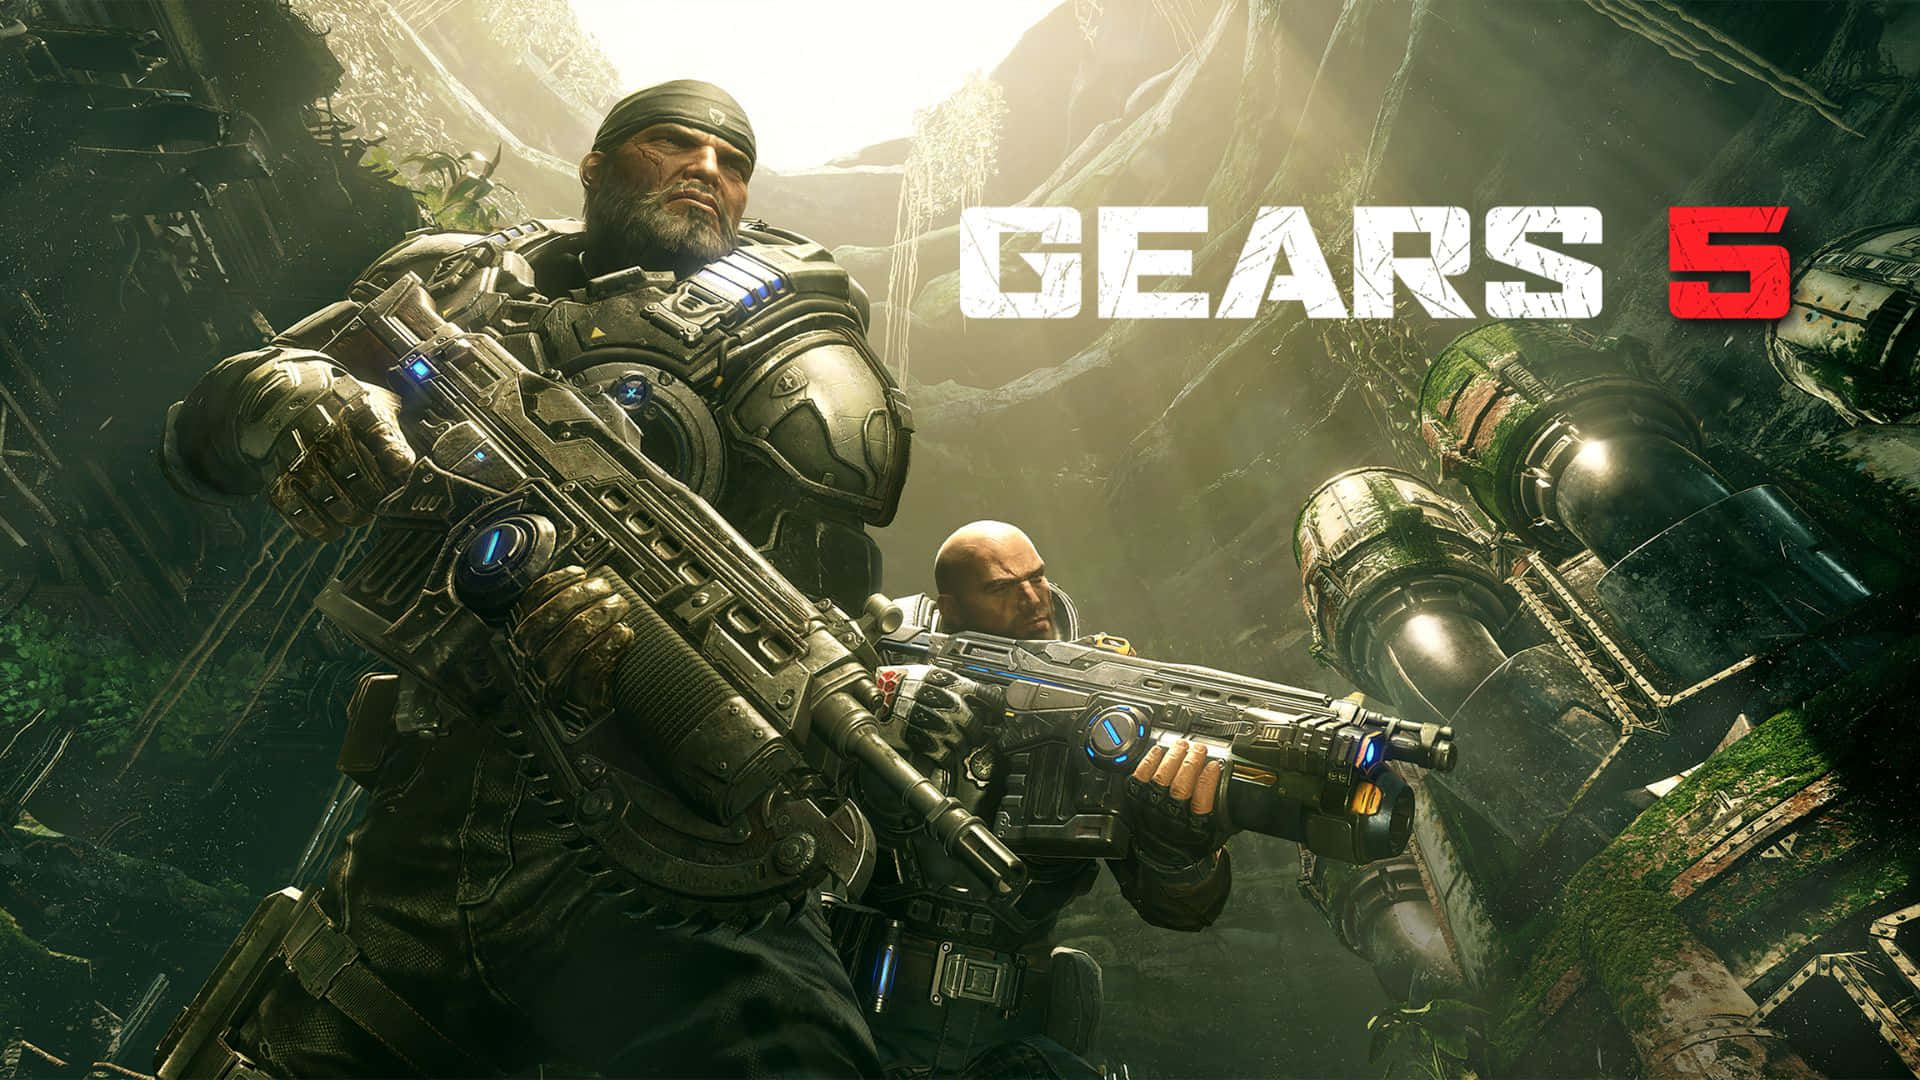 Immerse Yourself in the Epic Sci-Fi Action of Gears of War 5